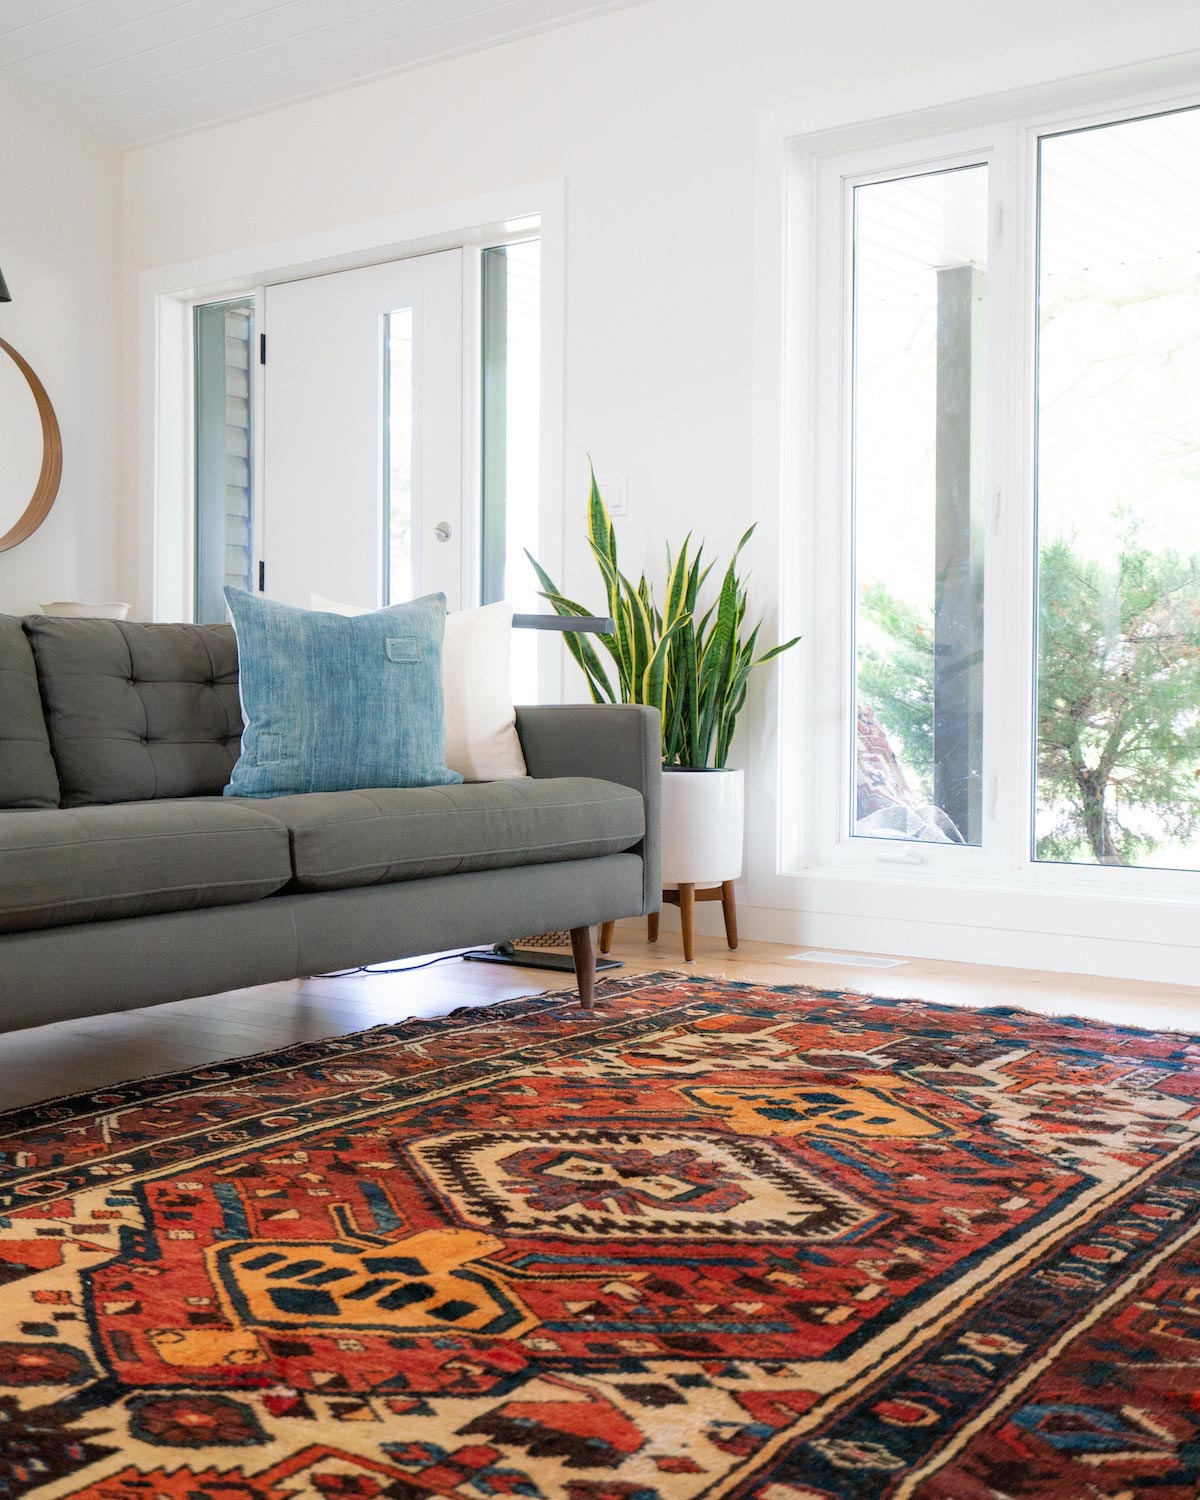 14 Tips For Decorating With Antique Rugs Caandesign Architecture And Home Design Blog